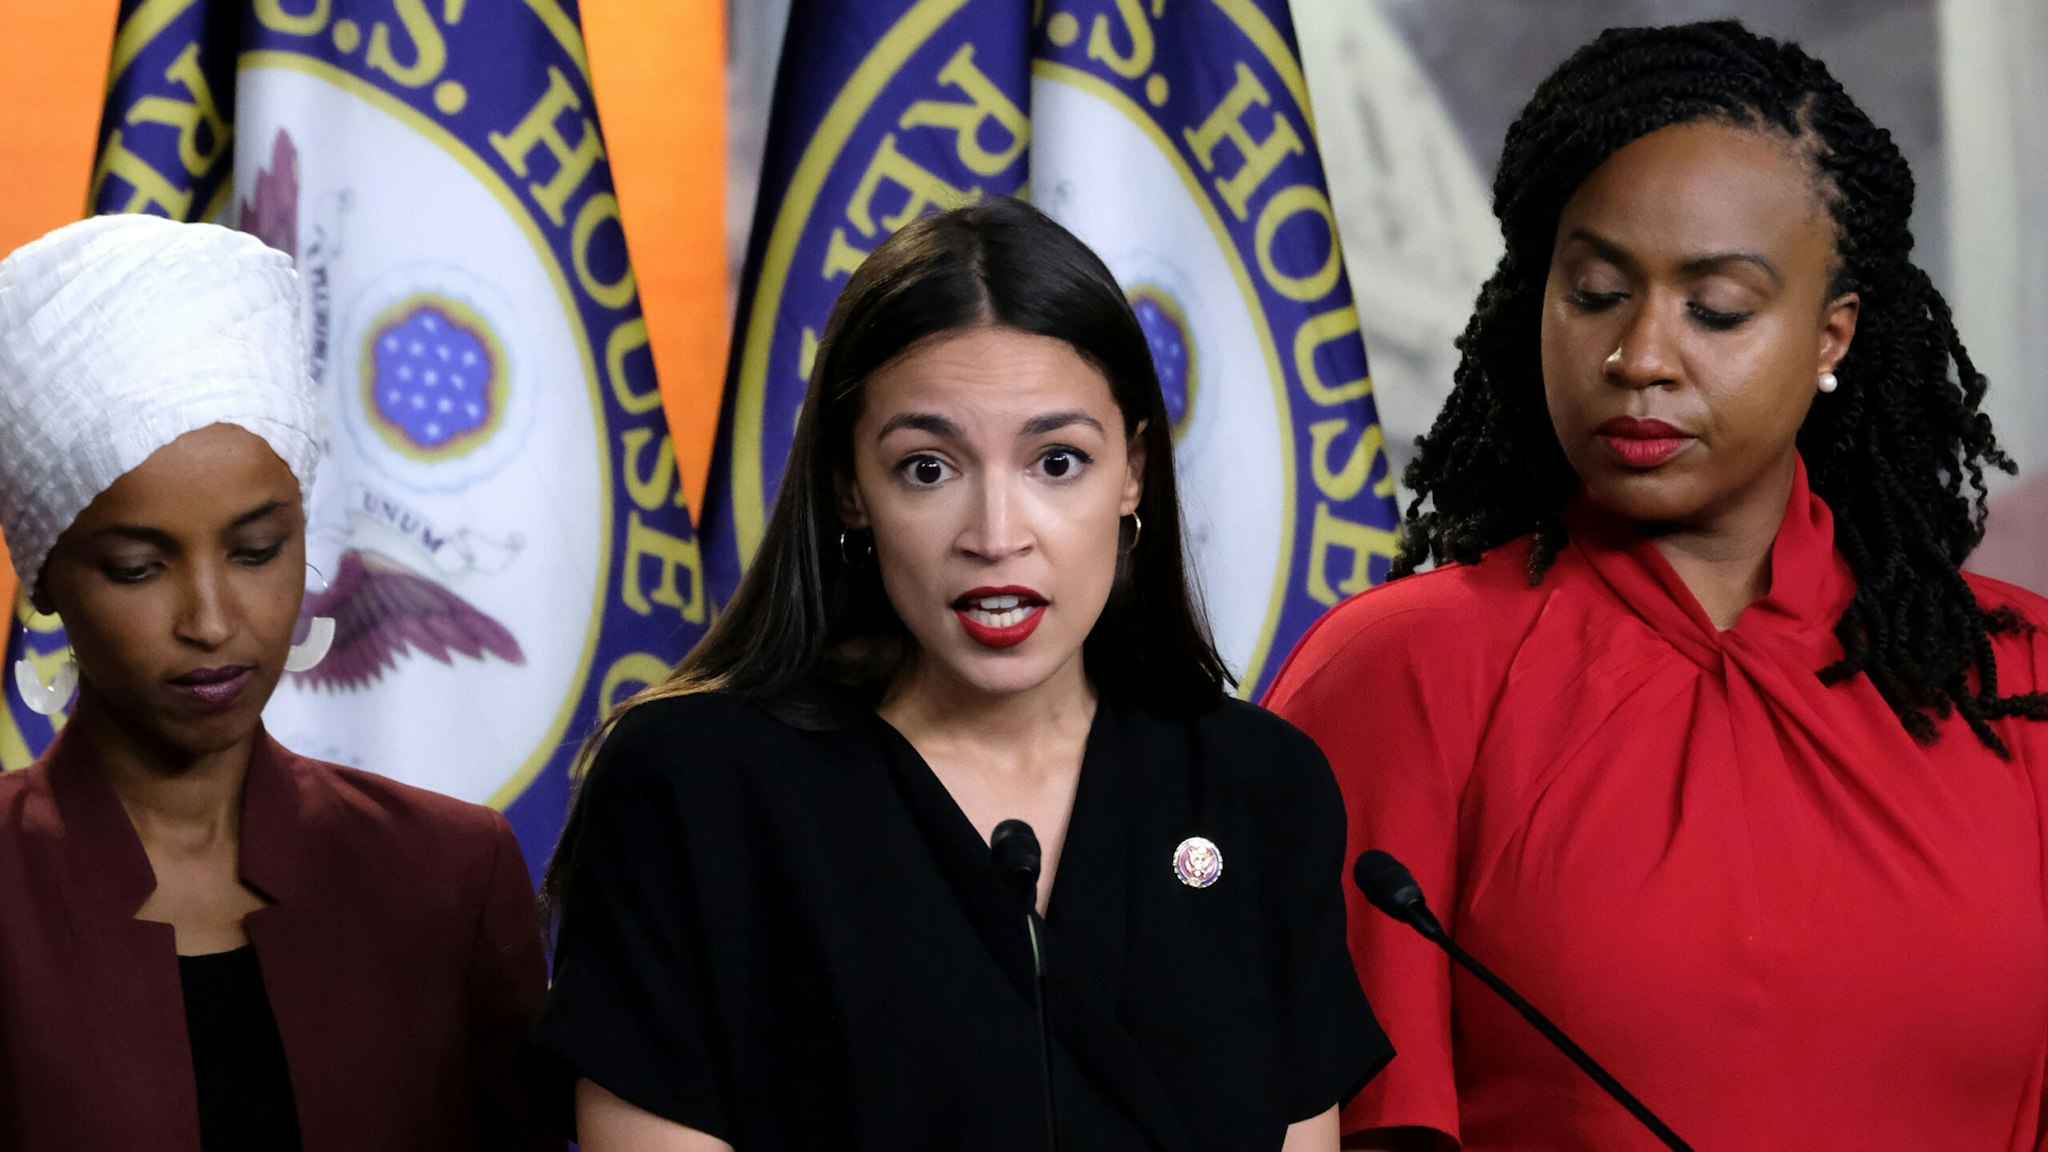 WASHINGTON, DC - JULY 15: U.S. Rep. Alexandria Ocasio-Cortez (D-NY) speaks as Reps. Ilhan Omar (D-MN) and Ayanna Pressley (D-MA) listen during a news conference at the U.S. Capitol on July 15, 2019 in Washington, DC. President Donald Trump stepped up his attacks on the four progressive Democratic congresswomen, saying that if they're not happy in the U.S. "they can leave."